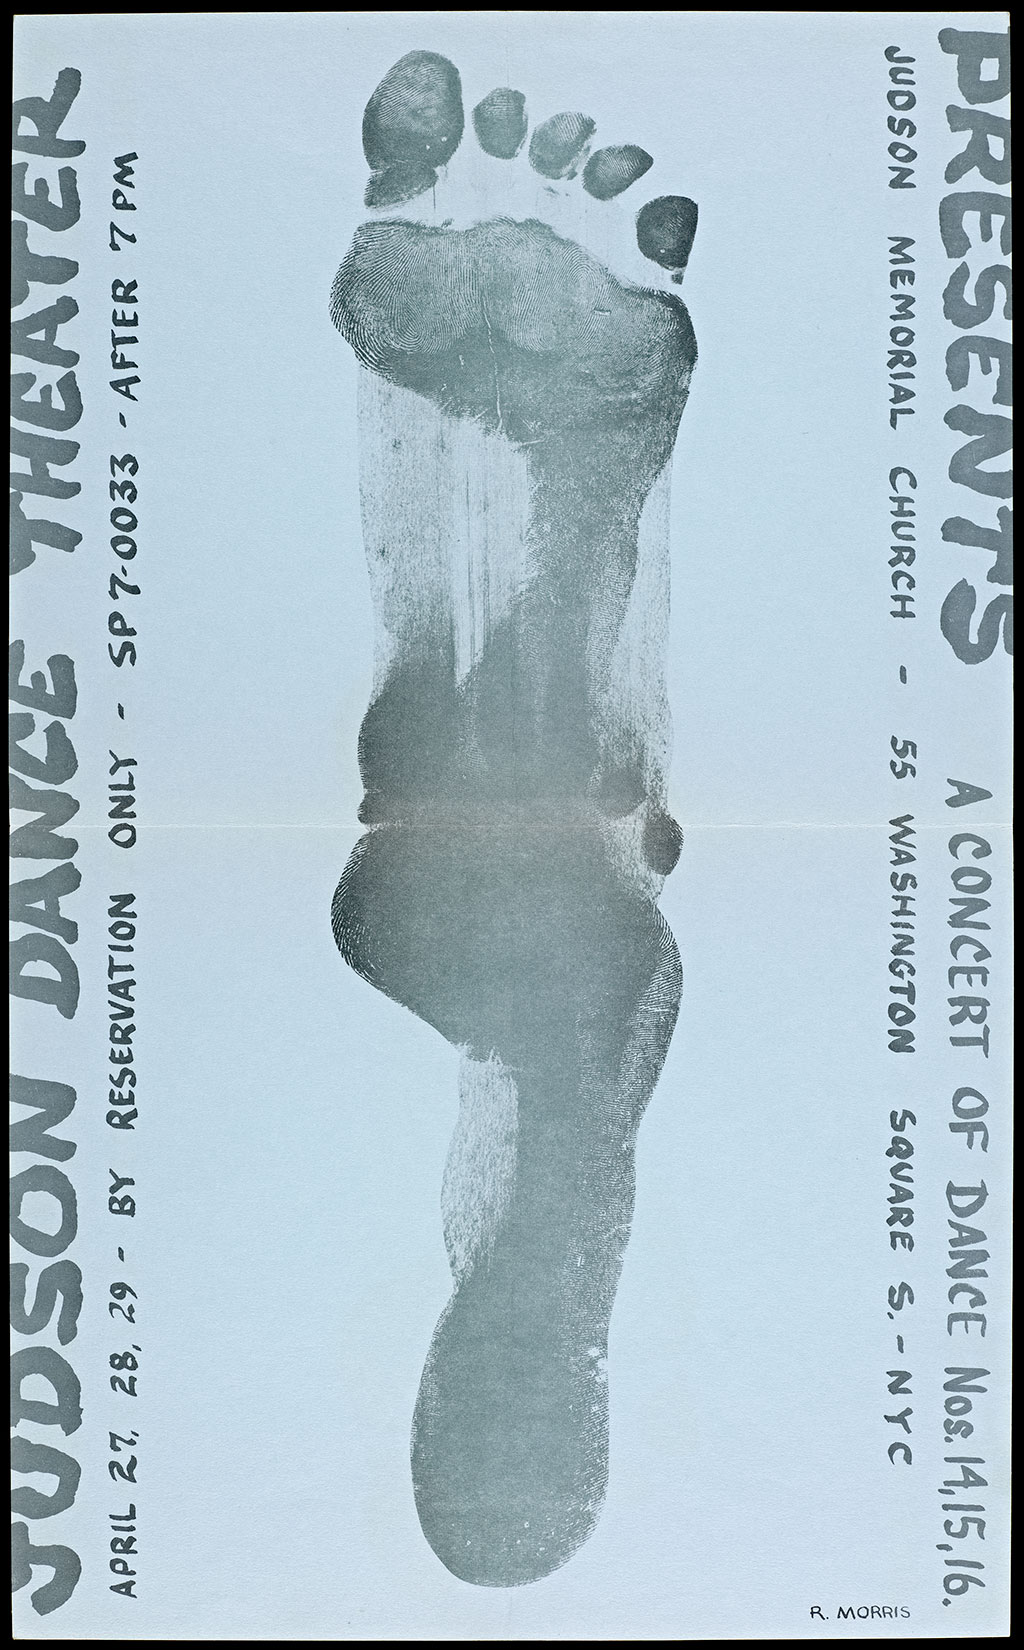 “A Concert of Dance Nos. 14, 15, 16,” Judson Memorial Church, New York, 1964. Design by Robert Morris. Offset print on paper. The Getty Research Institute